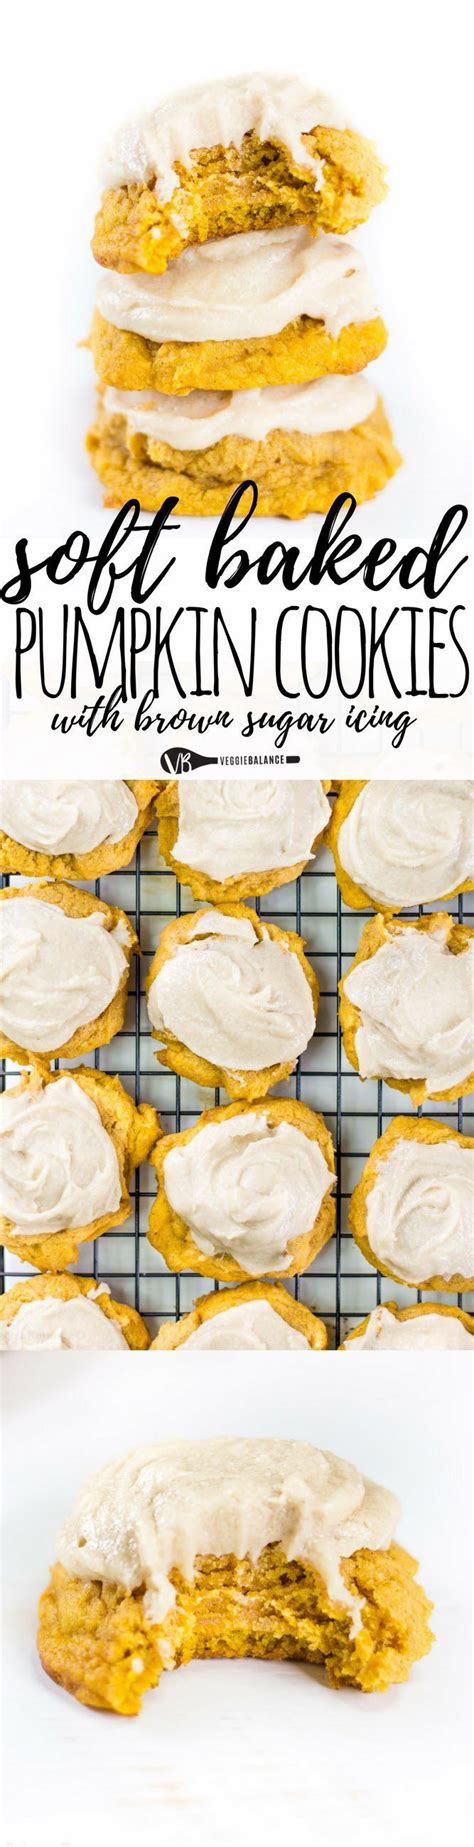 Gluten Free Soft Baked Pumpkin Cookies With Brown Sugar Frosting Will